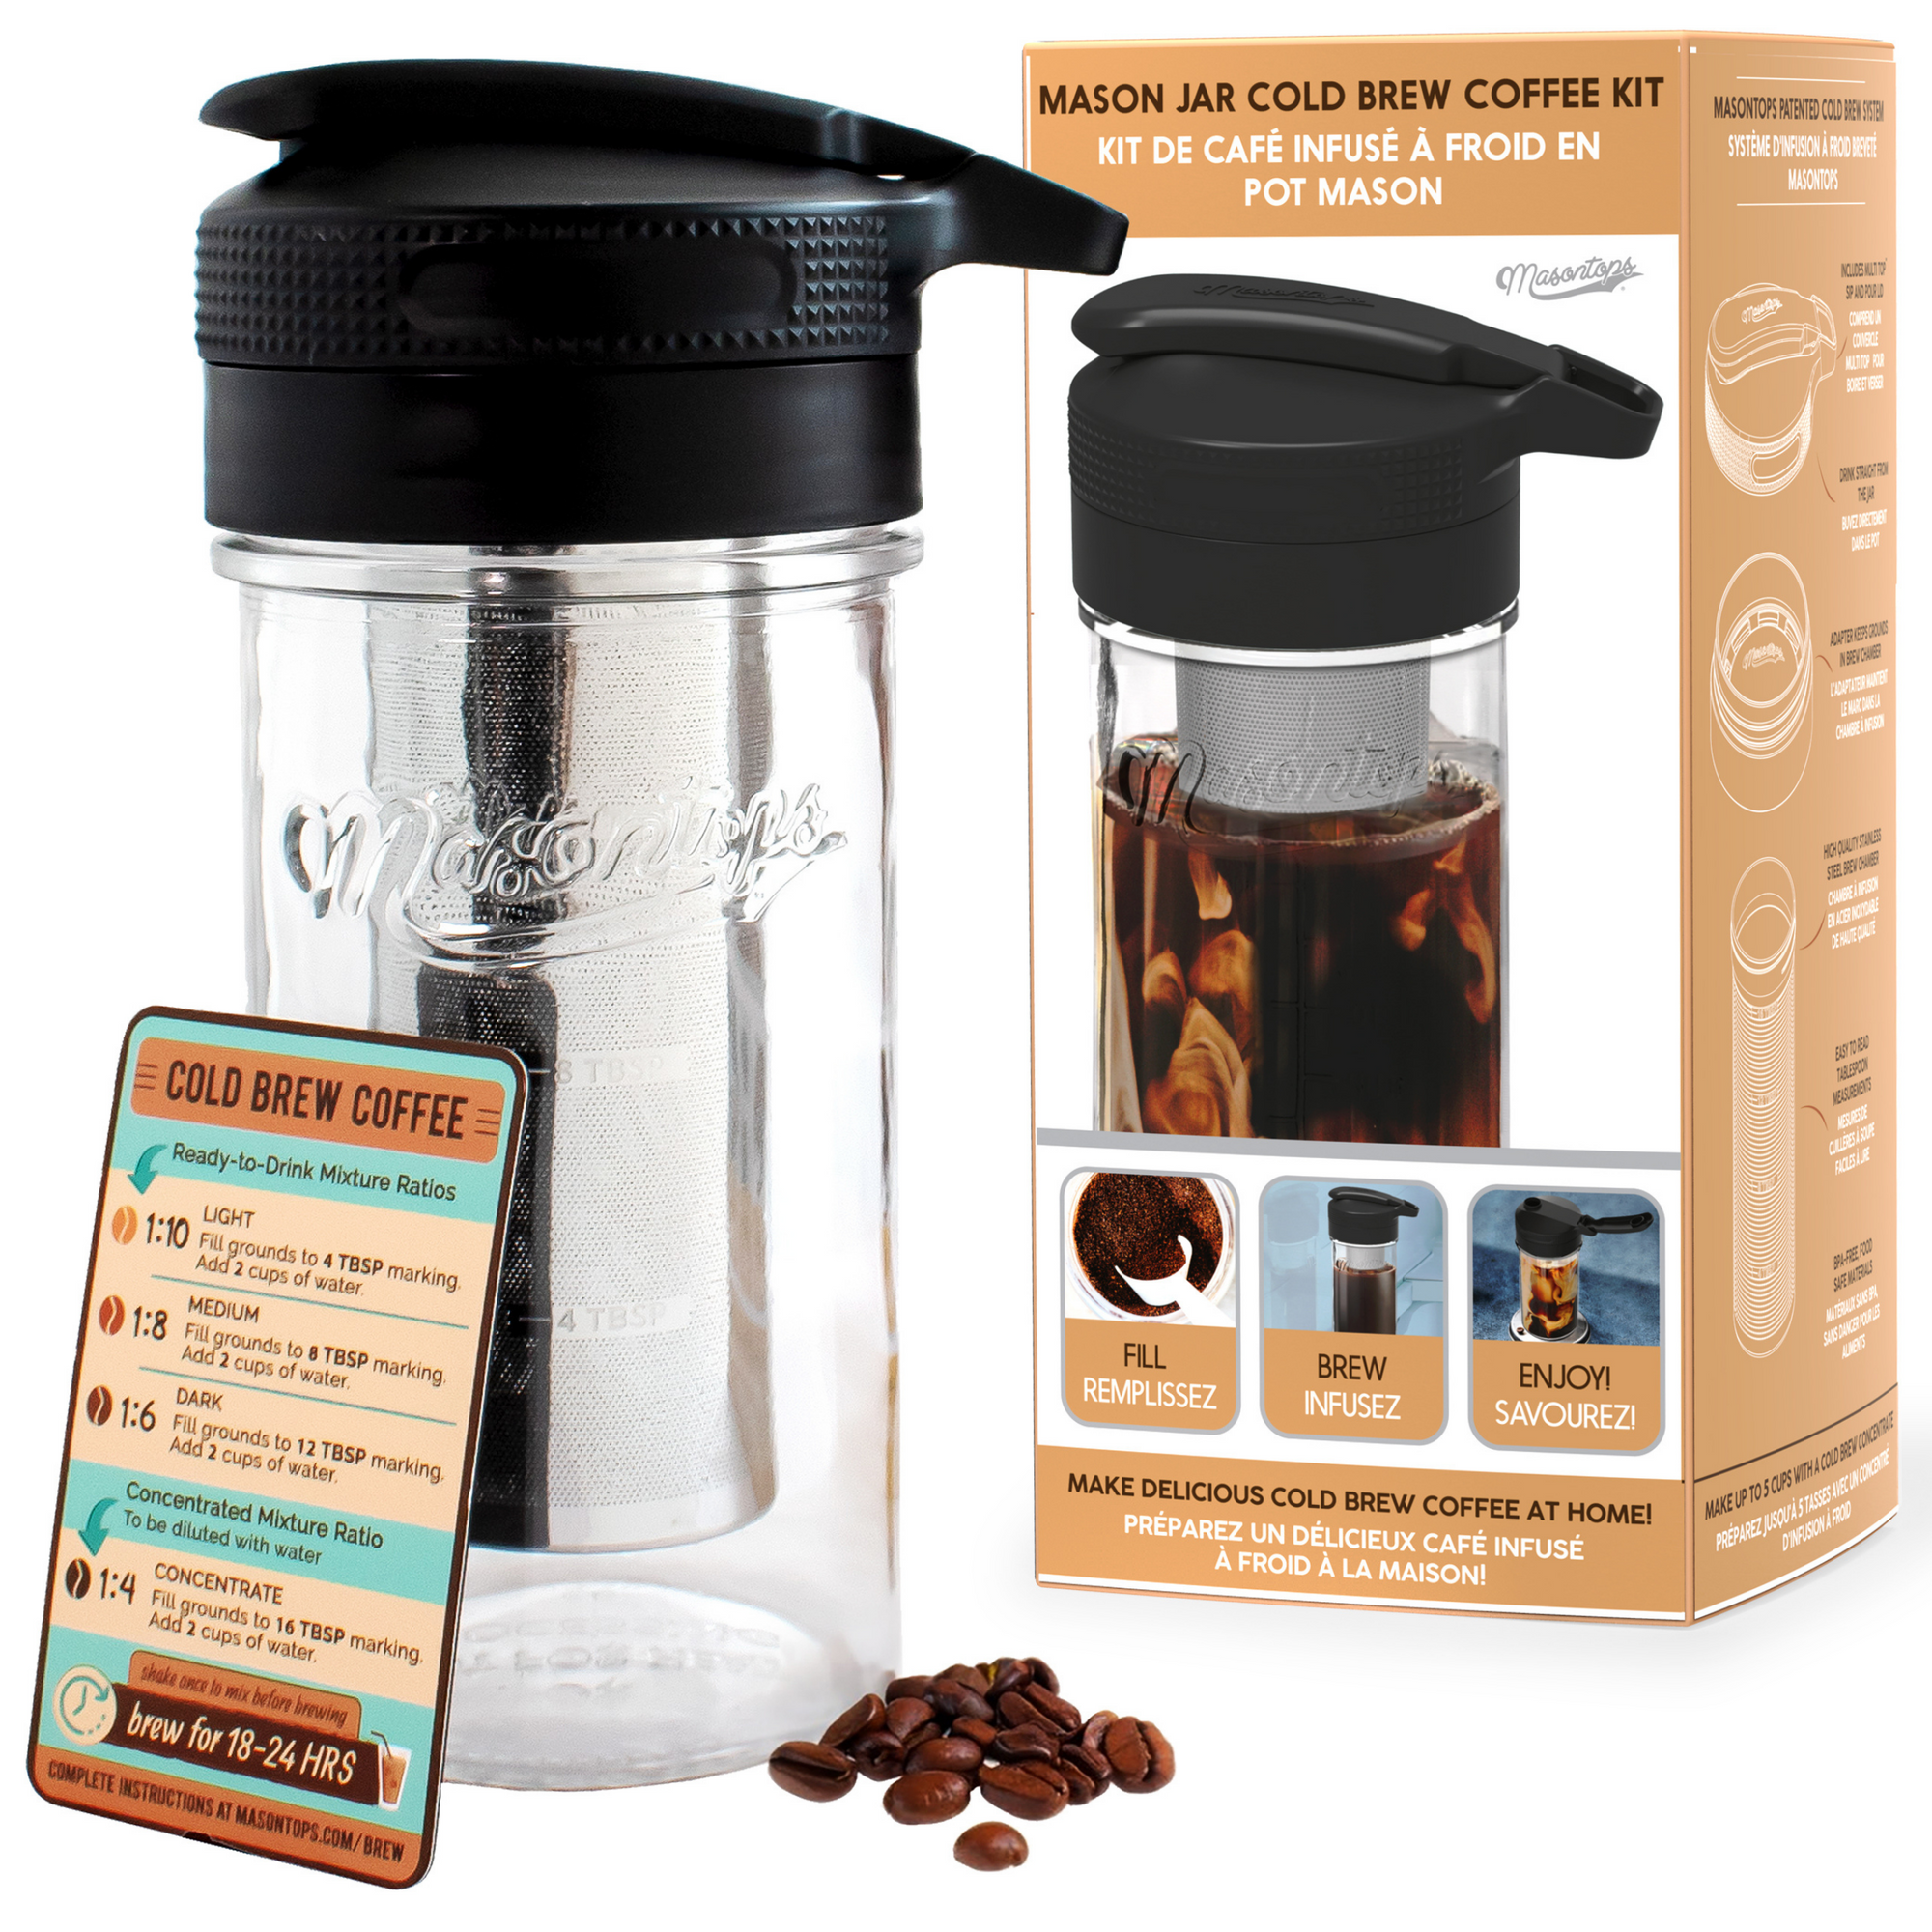 Cold Brew Flavored Coffee Kit